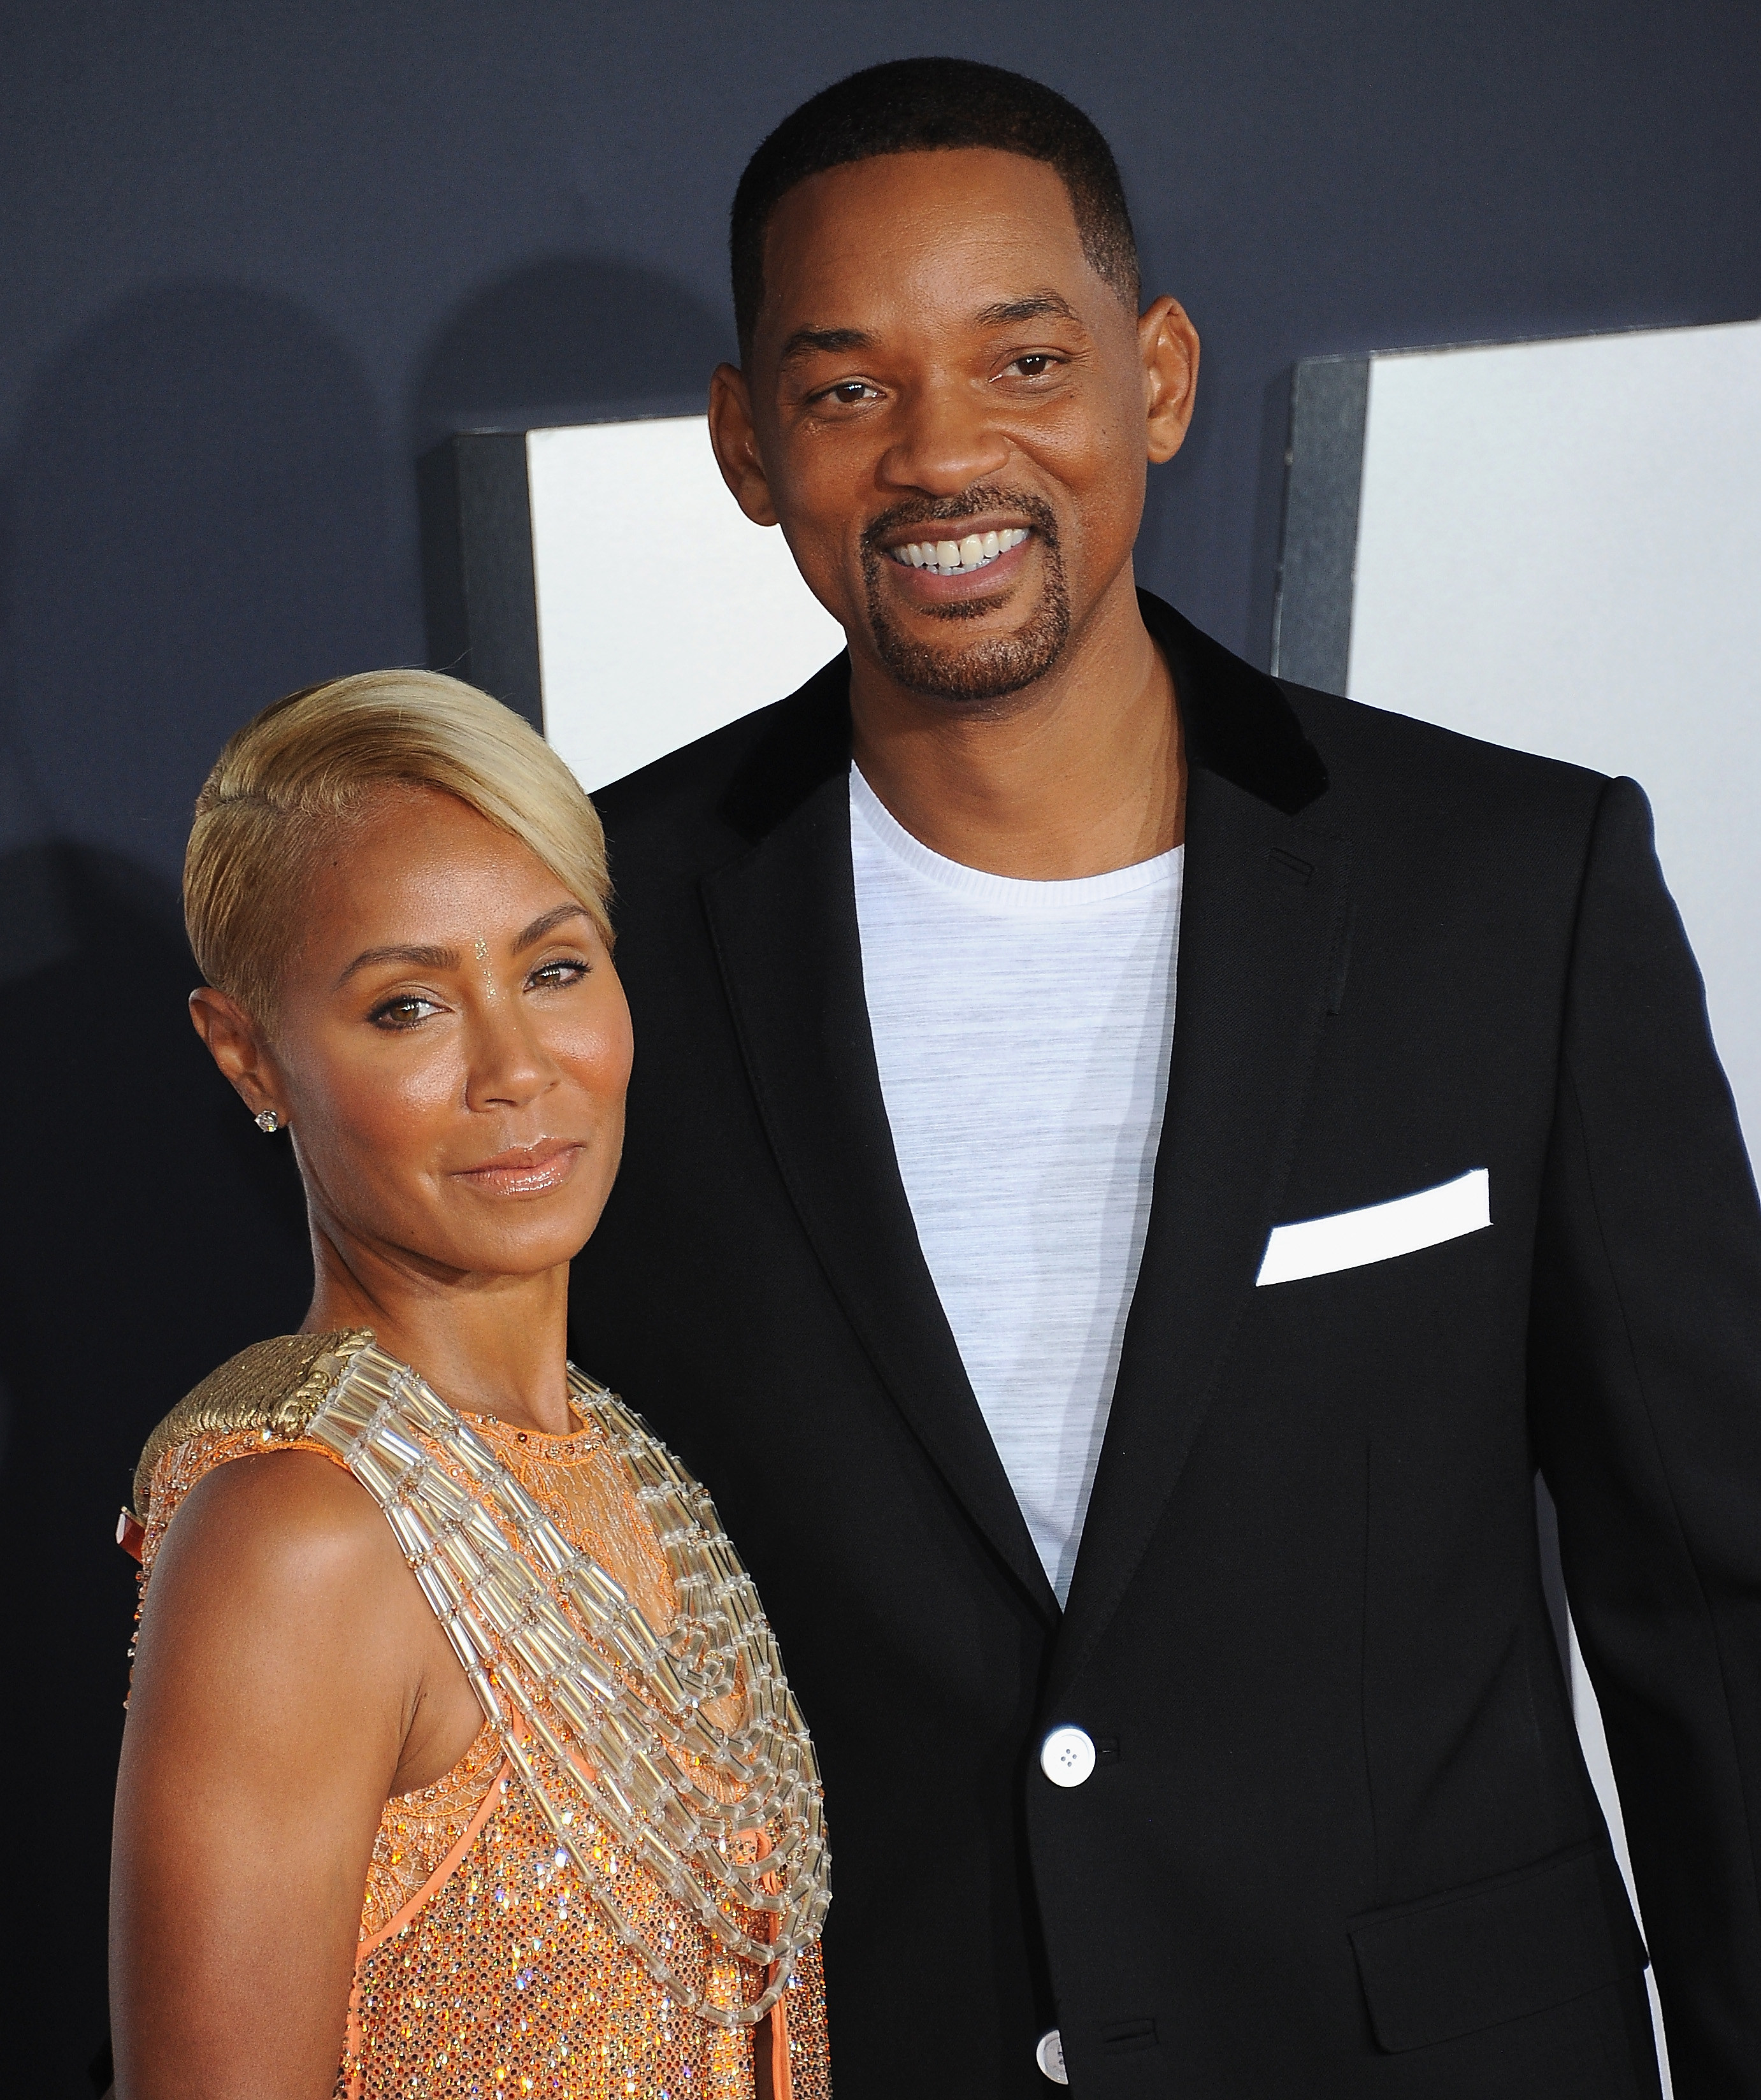 will and jada appearing to not age at all